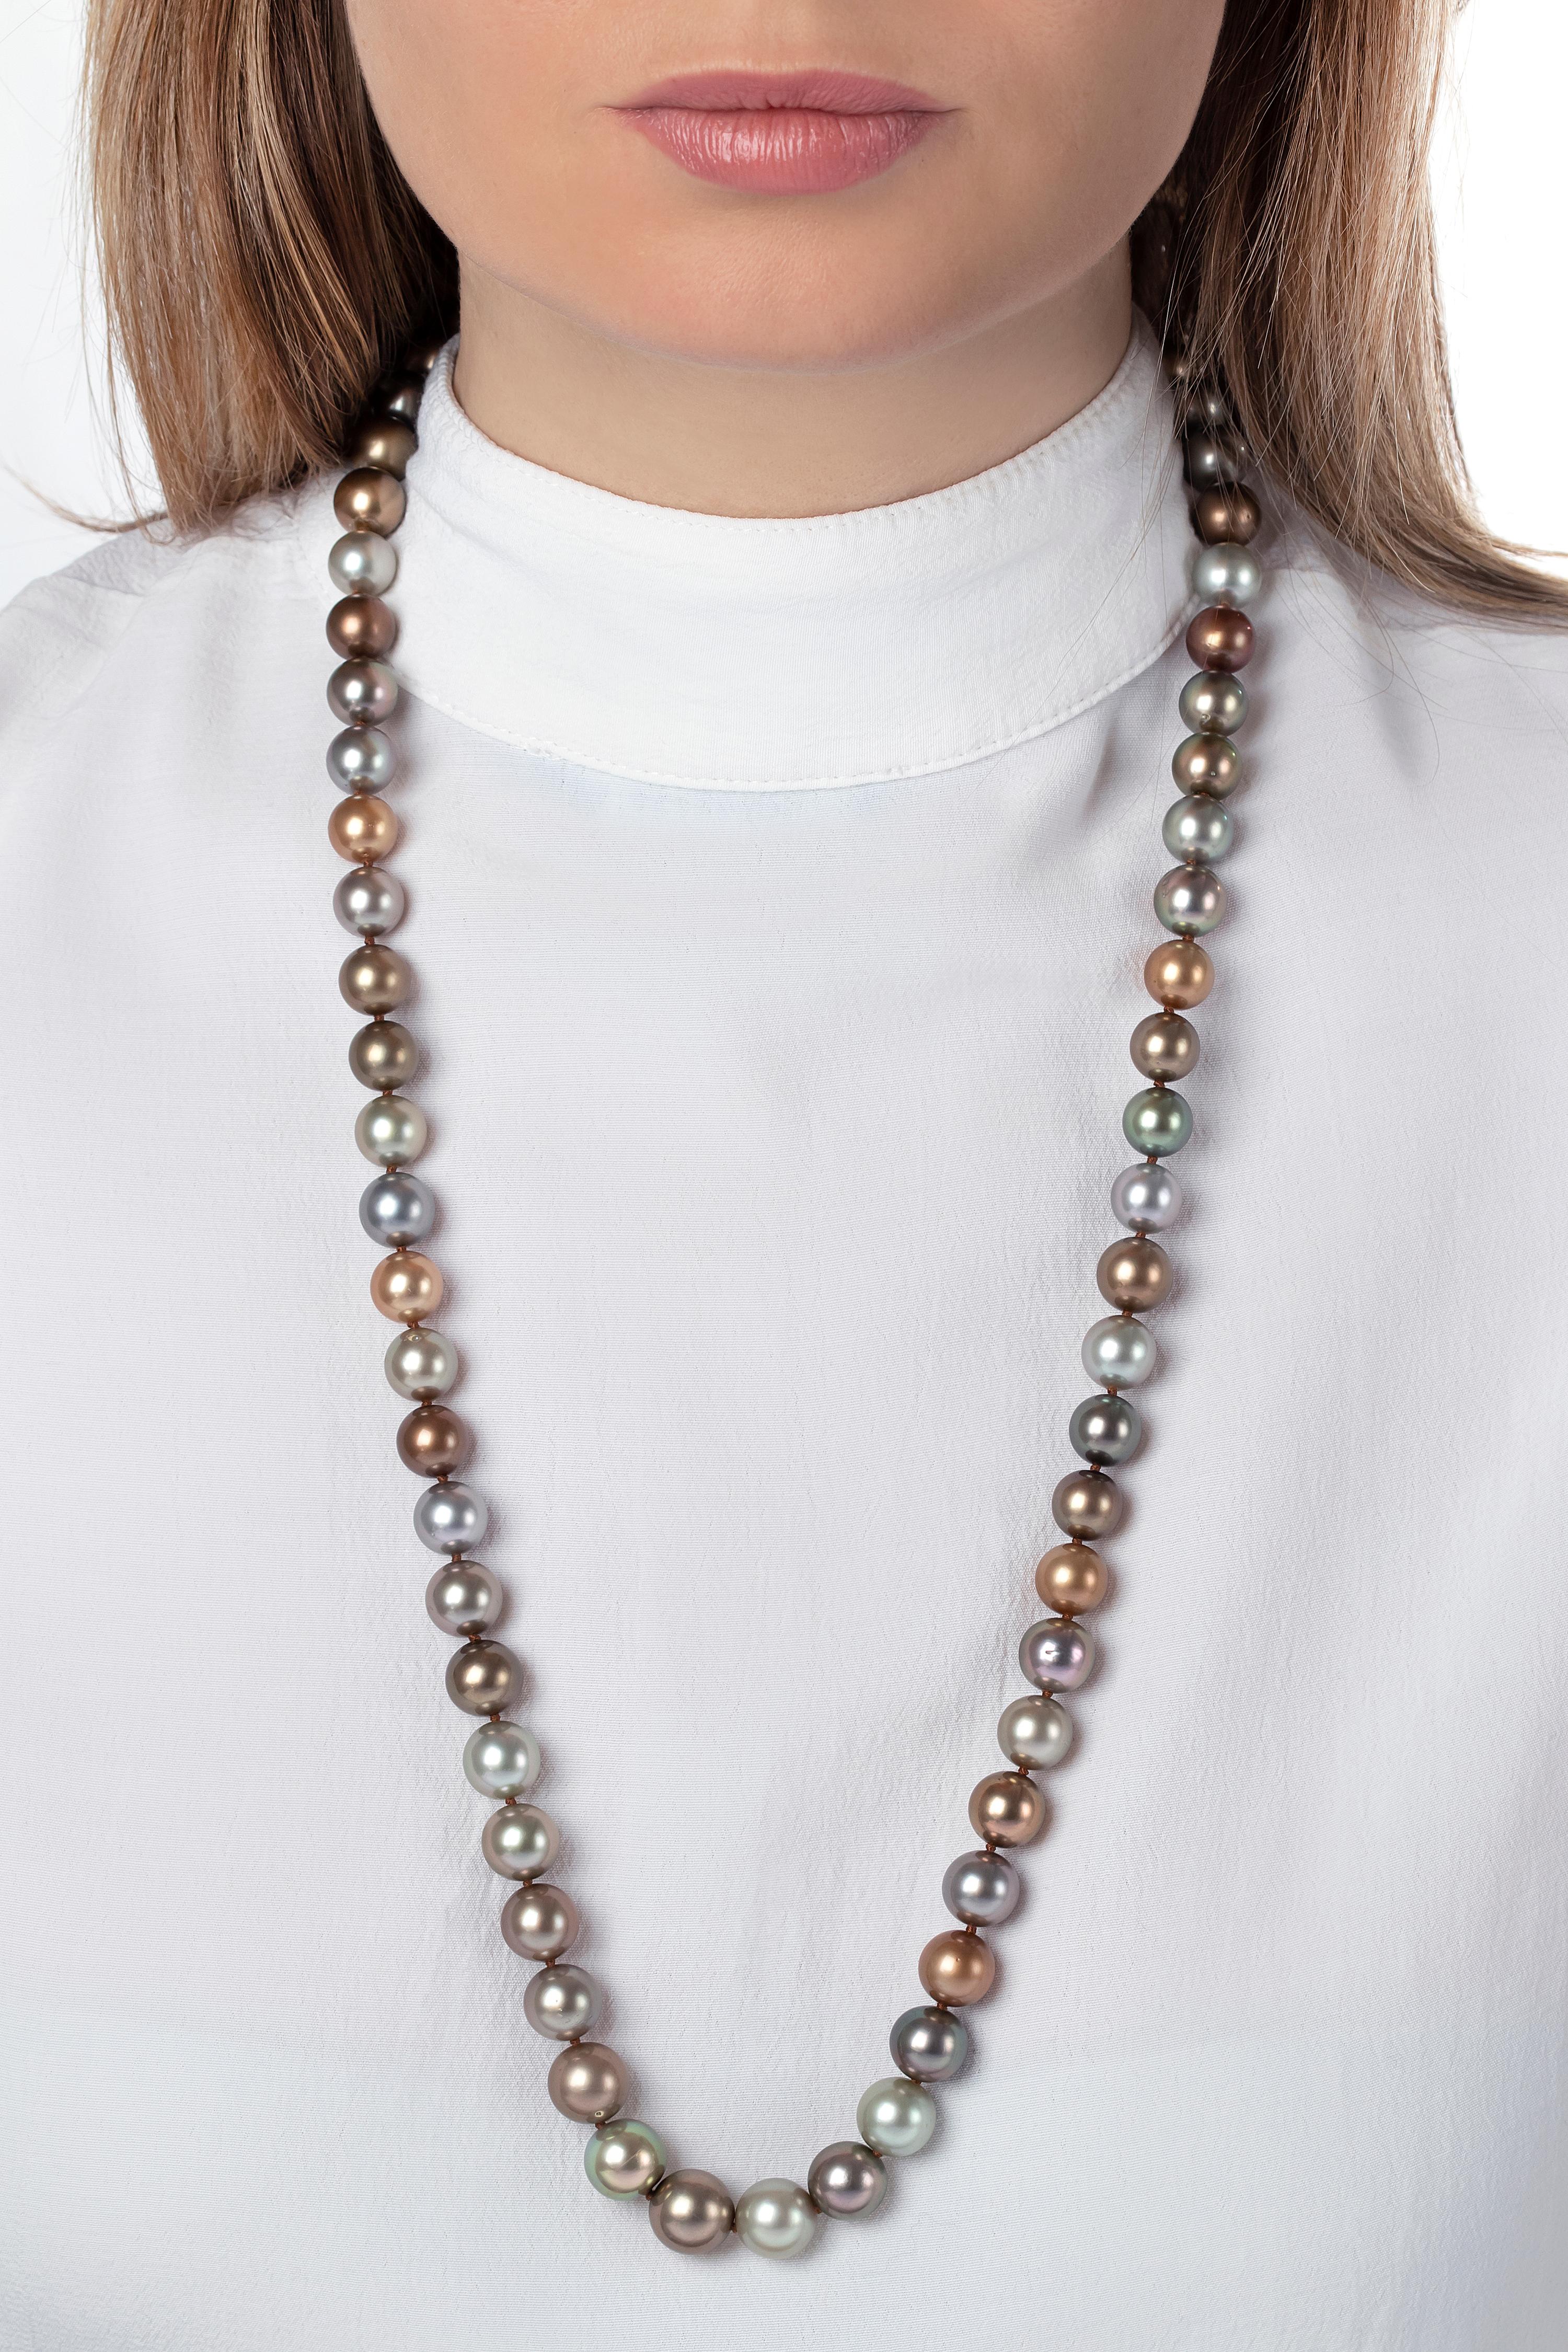 Contemporary Yoko London Multicolored Tahitian Pearl Long Necklace in 18 Karat White Gold For Sale